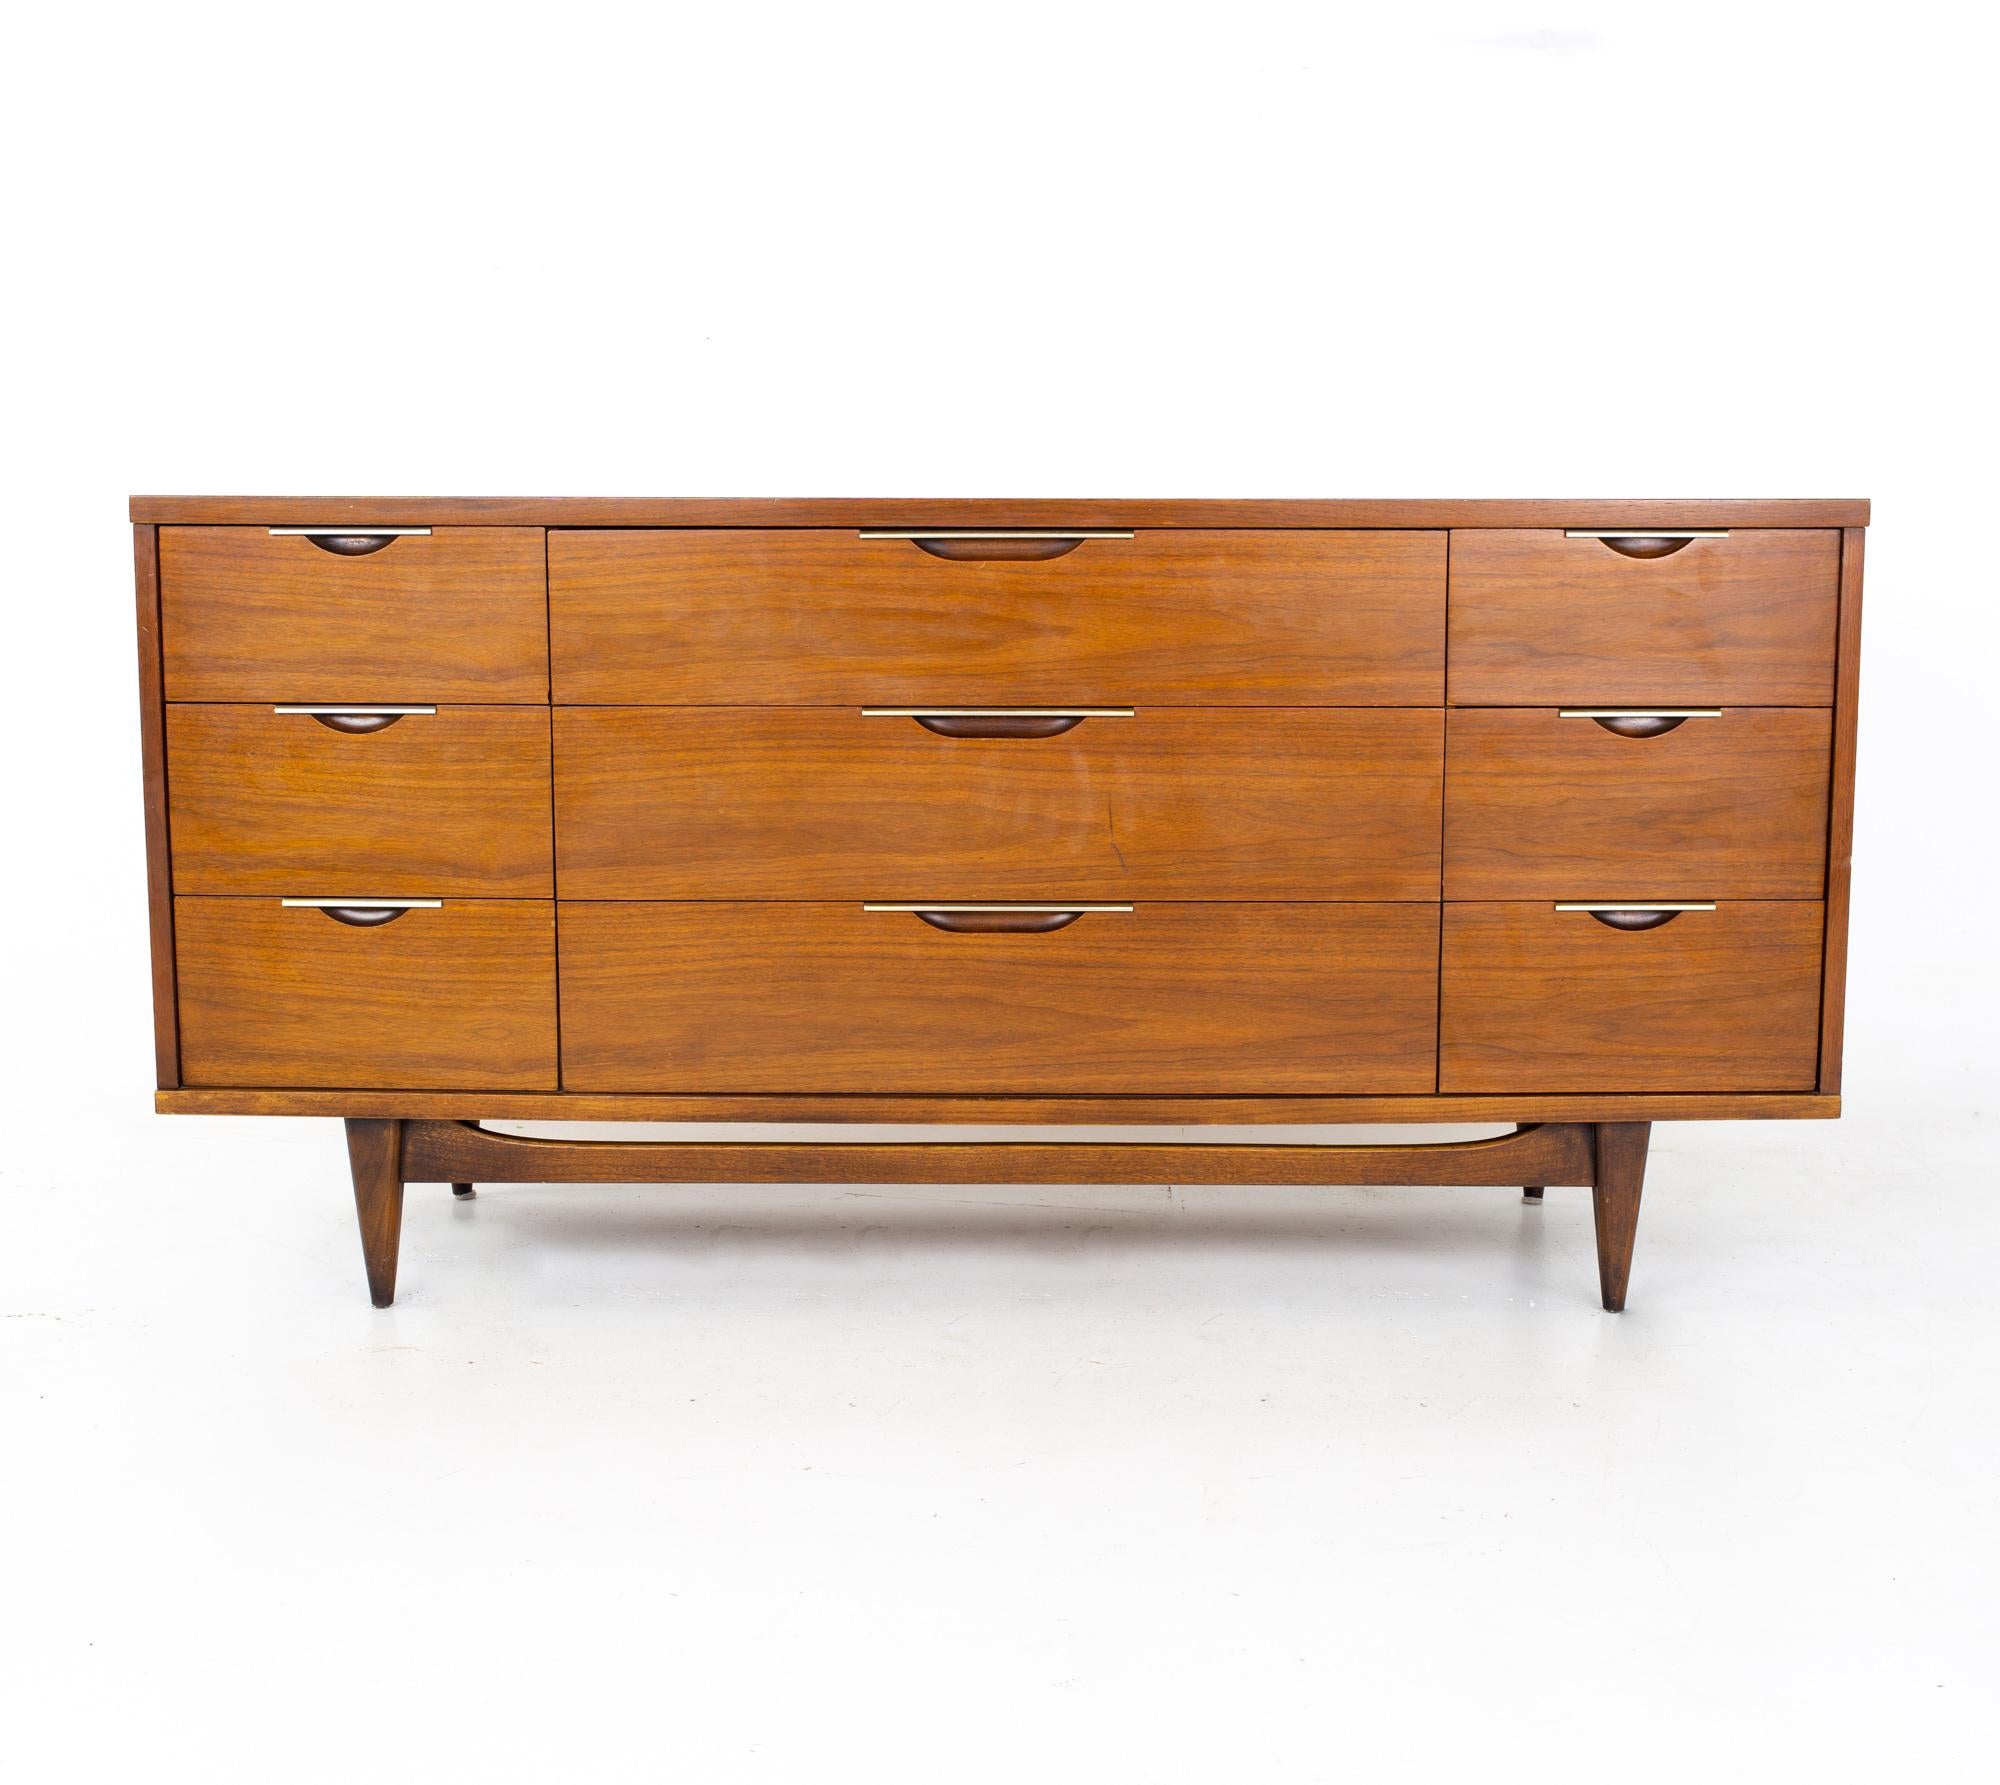 Kent Coffey Tableau mid century walnut and laminate 9 drawer lowboy dresser

The dresser measures: 64.25 wide x 19.25 deep x 31.5 inches high

All pieces of furniture can be had in what we call restored vintage condition. That means the piece is